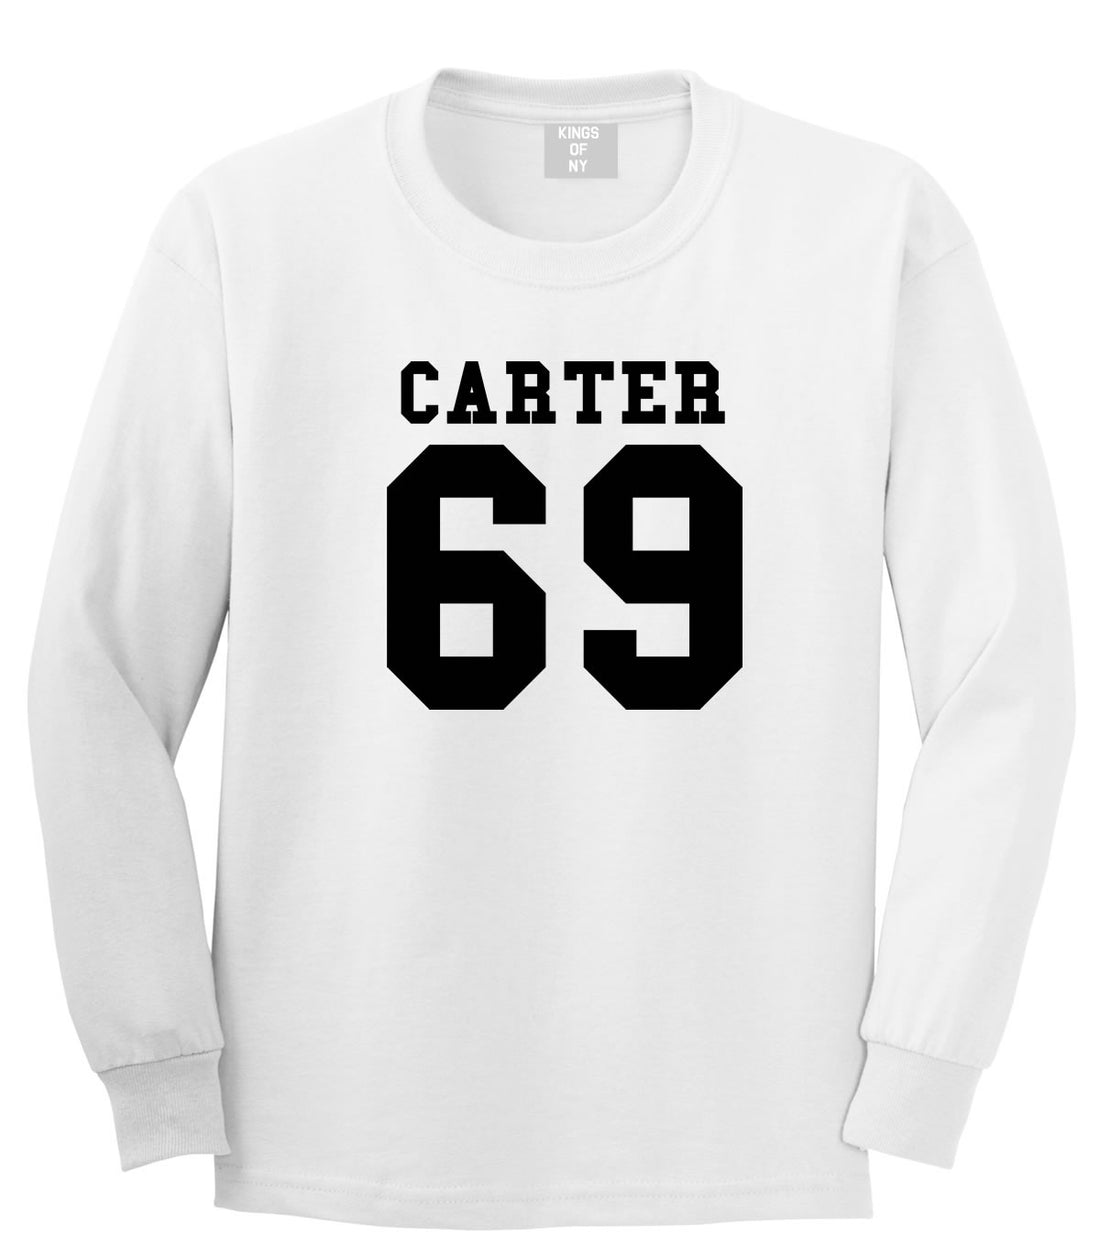  Carter 69 Team Long Sleeve T-Shirt in White by Kings Of NY